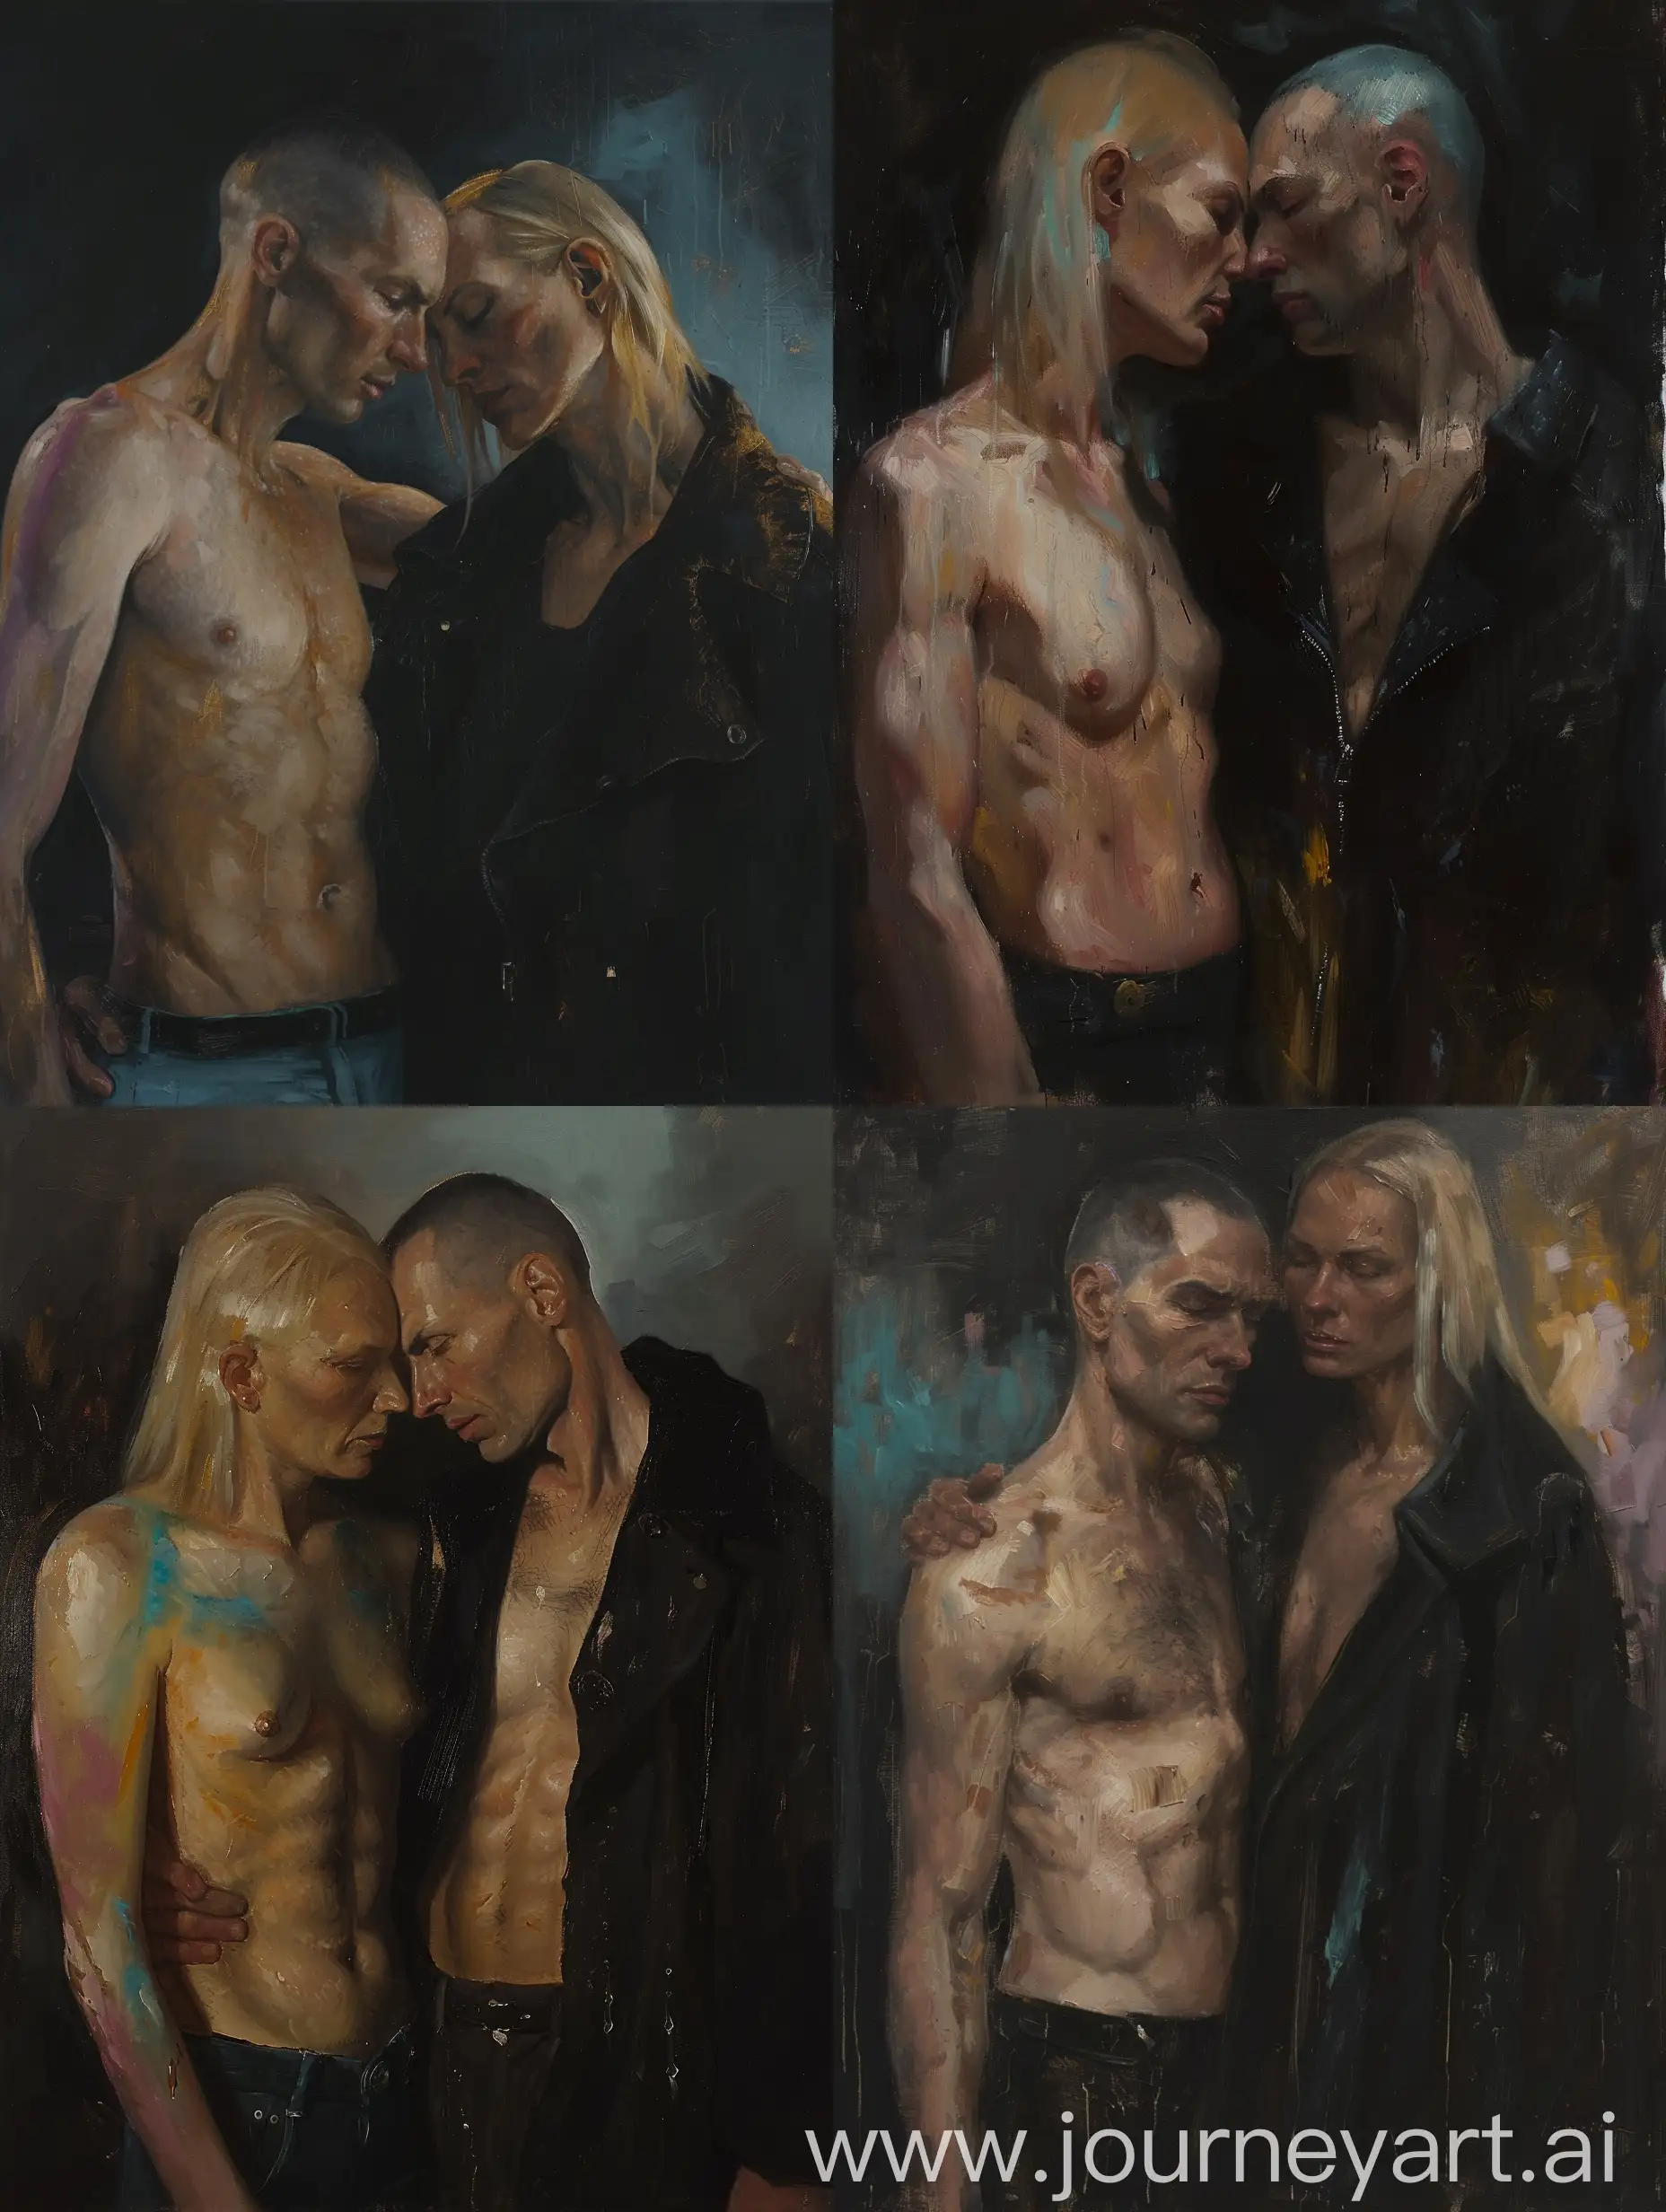 oil painting depicts two individuals in close proximity, one with a bare torso and the other wearing a dark open shirt or coat, showing emotional connection.